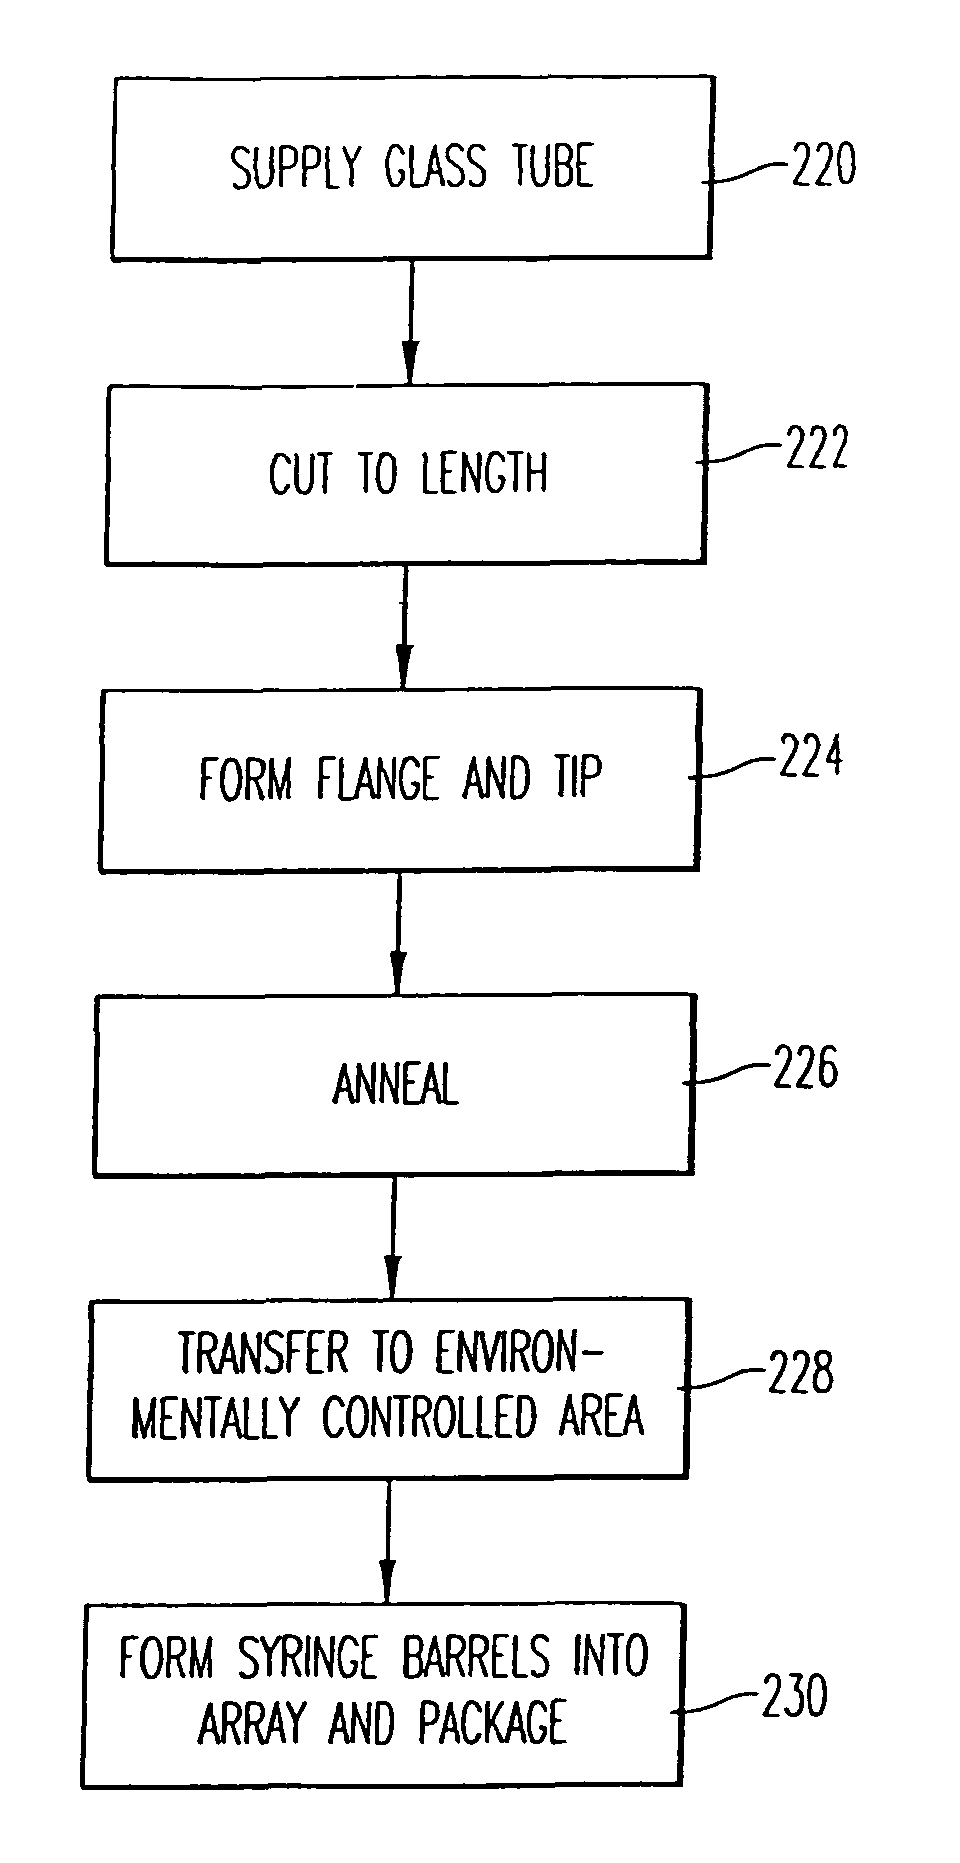 Method and apparatus for manufacturing, filling and packaging medical devices and medical containers